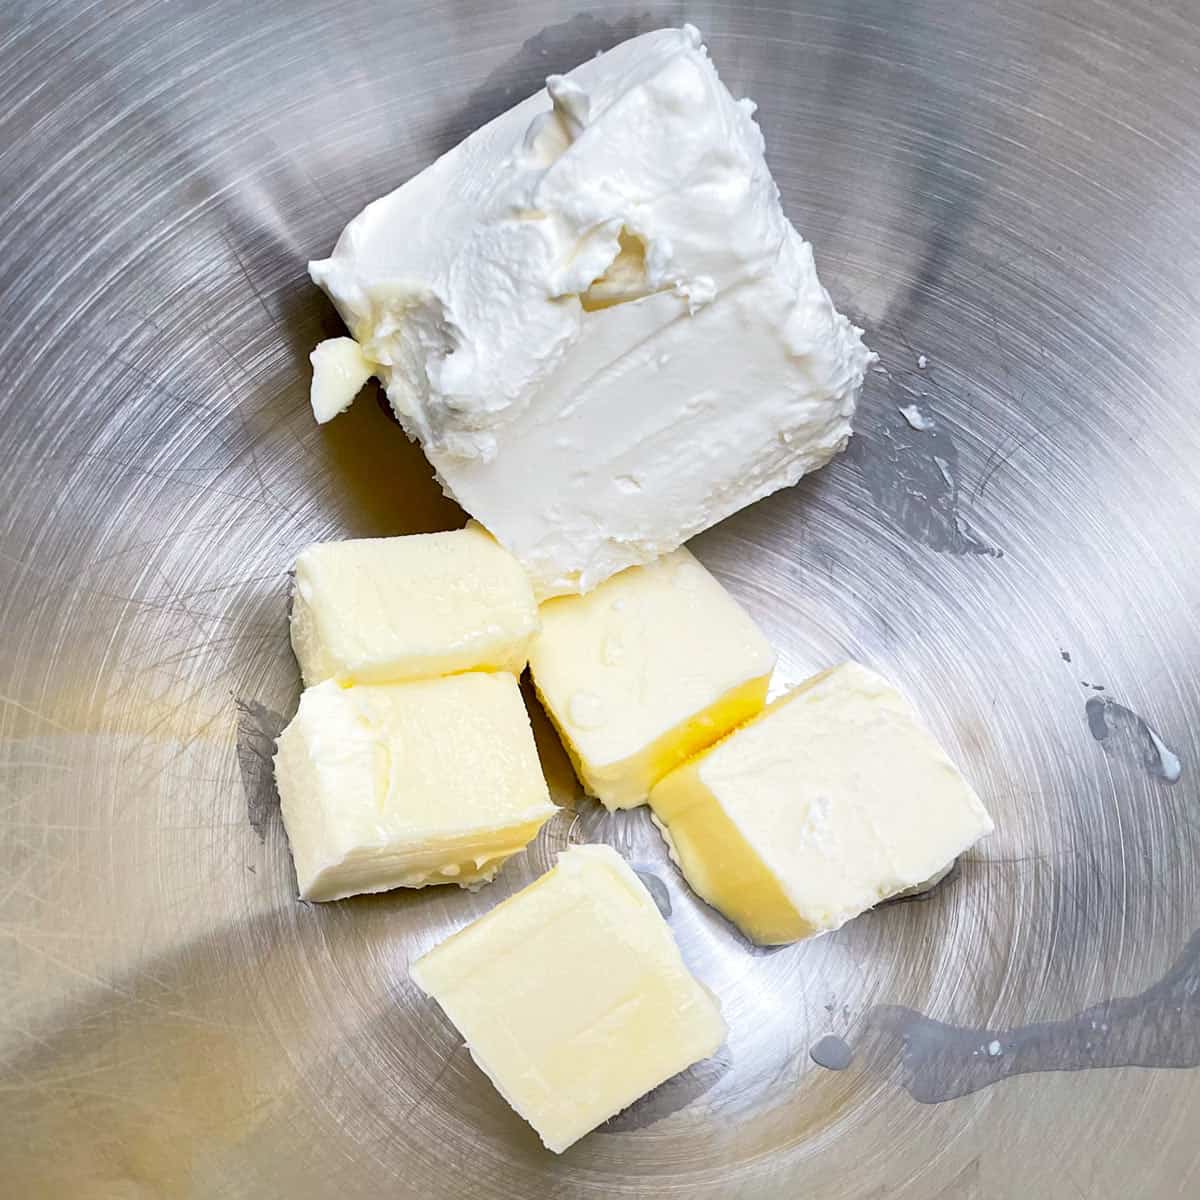 Cubed butter and block of cream cheese ready to be creamed with a mixer.